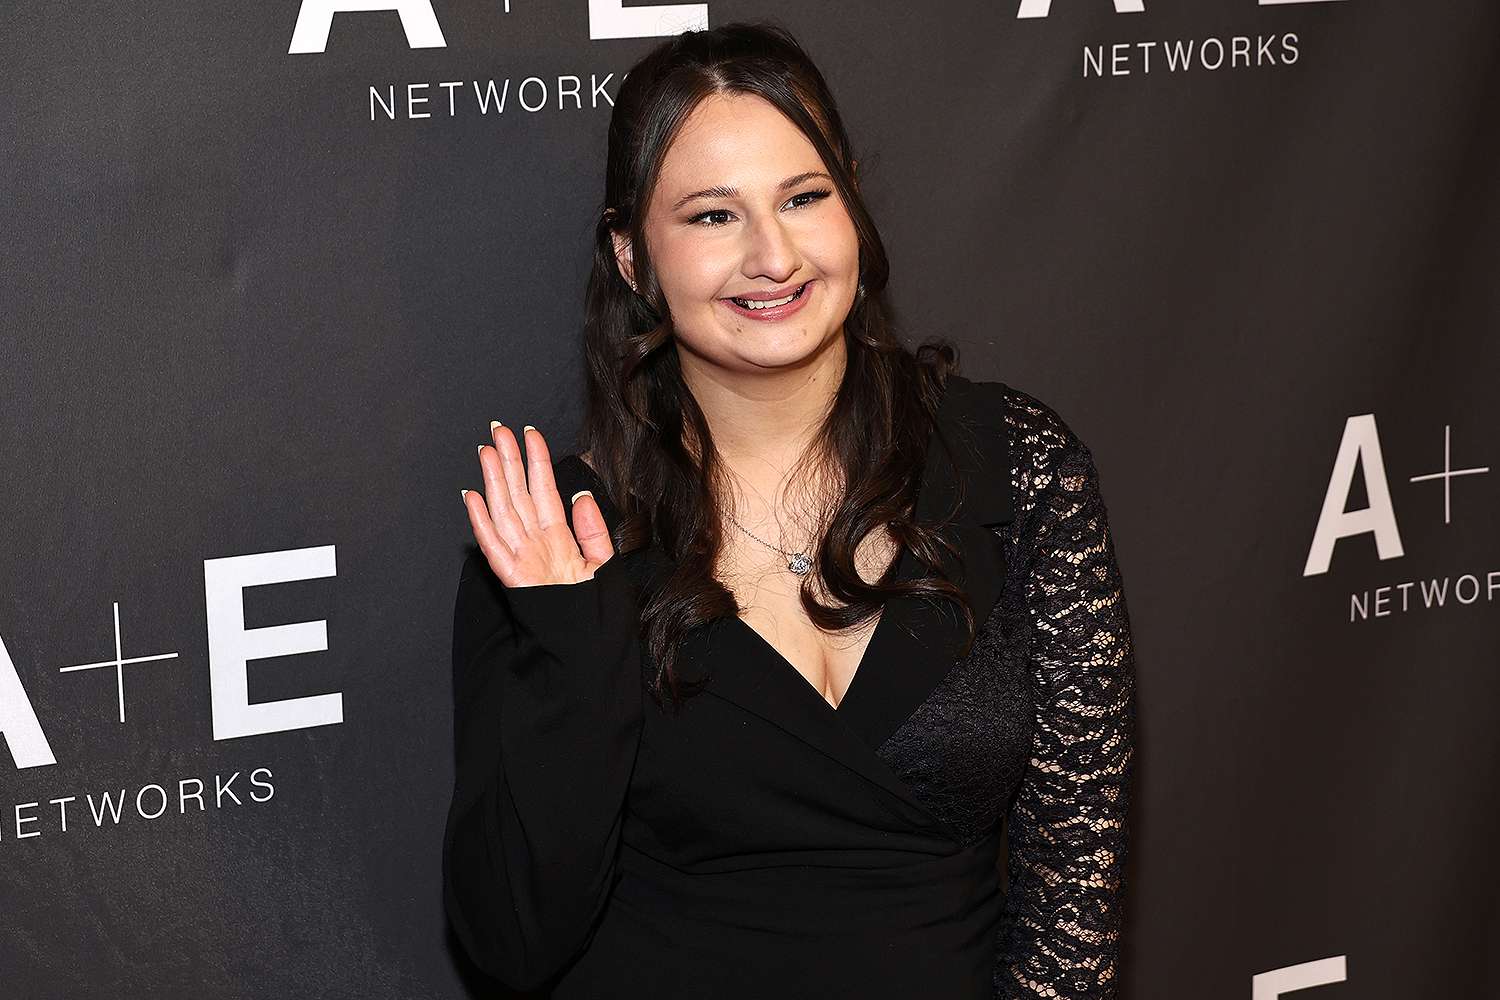 Gypsy Rose Blanchard Spends Time with Ex-Fiancé Ken Urker and Her Family amid Divorce from Ryan Scott Anderson